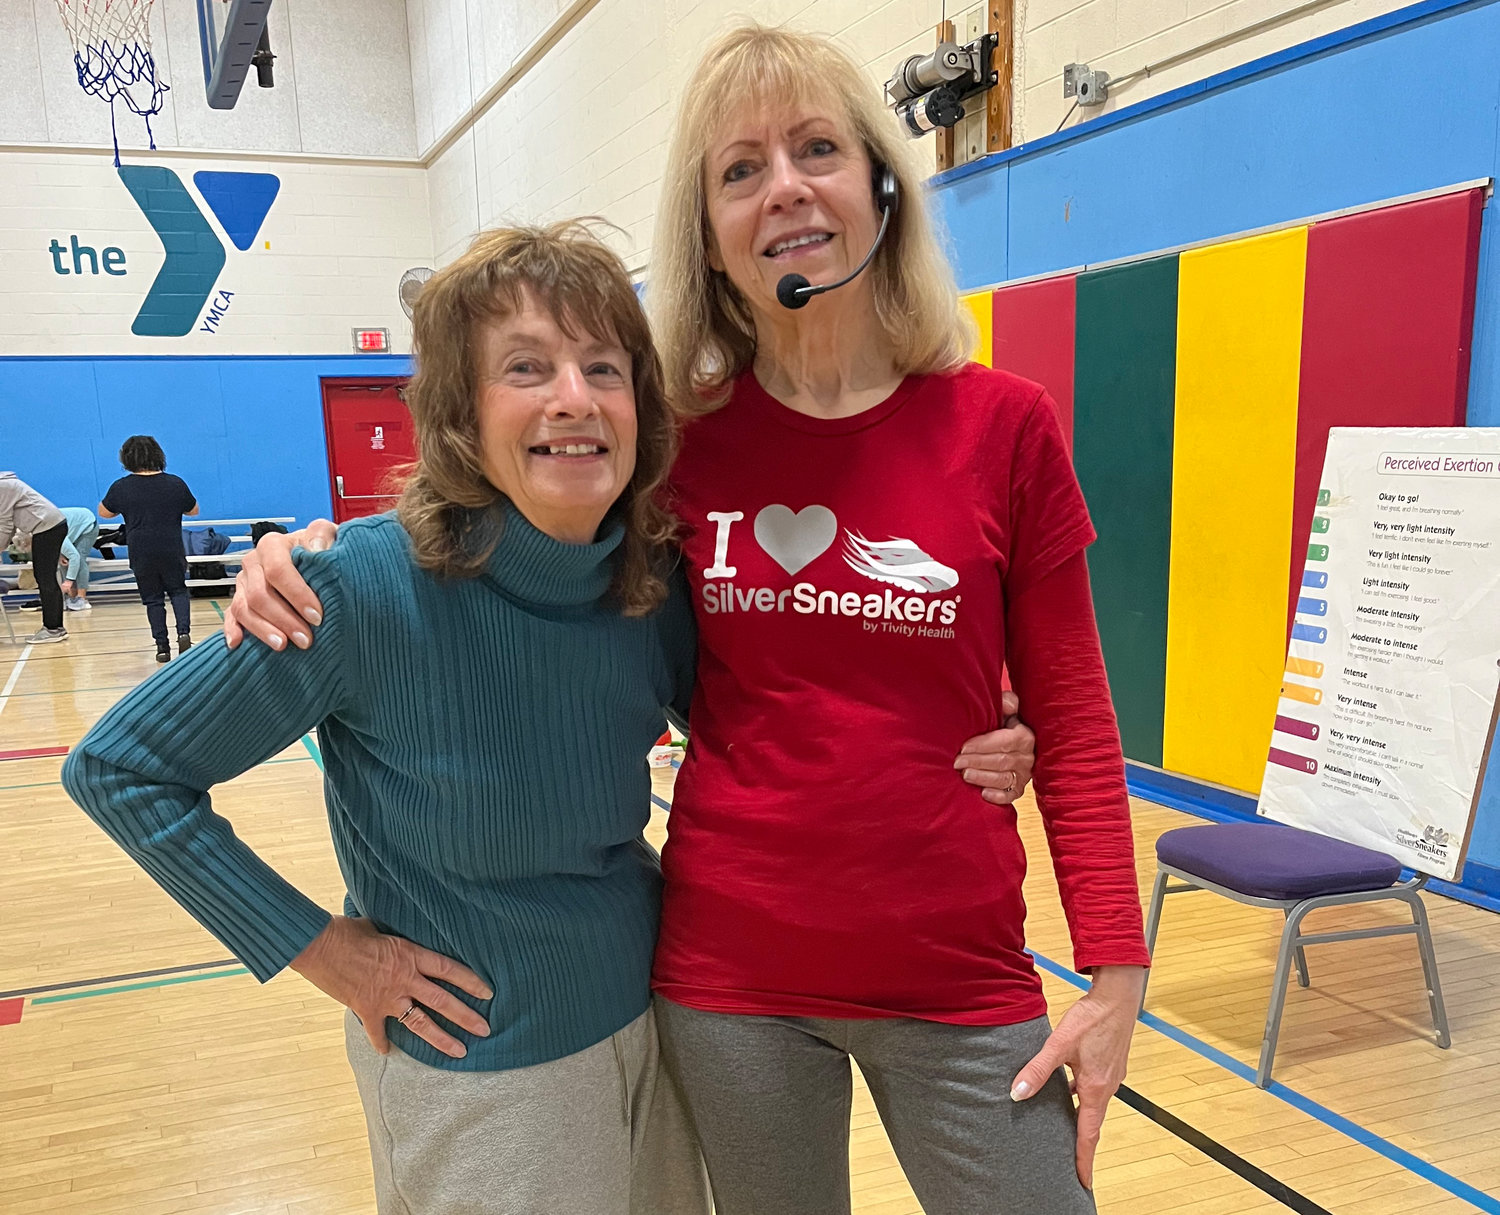 Silver Sneakers program geared for fitness needs of area seniors